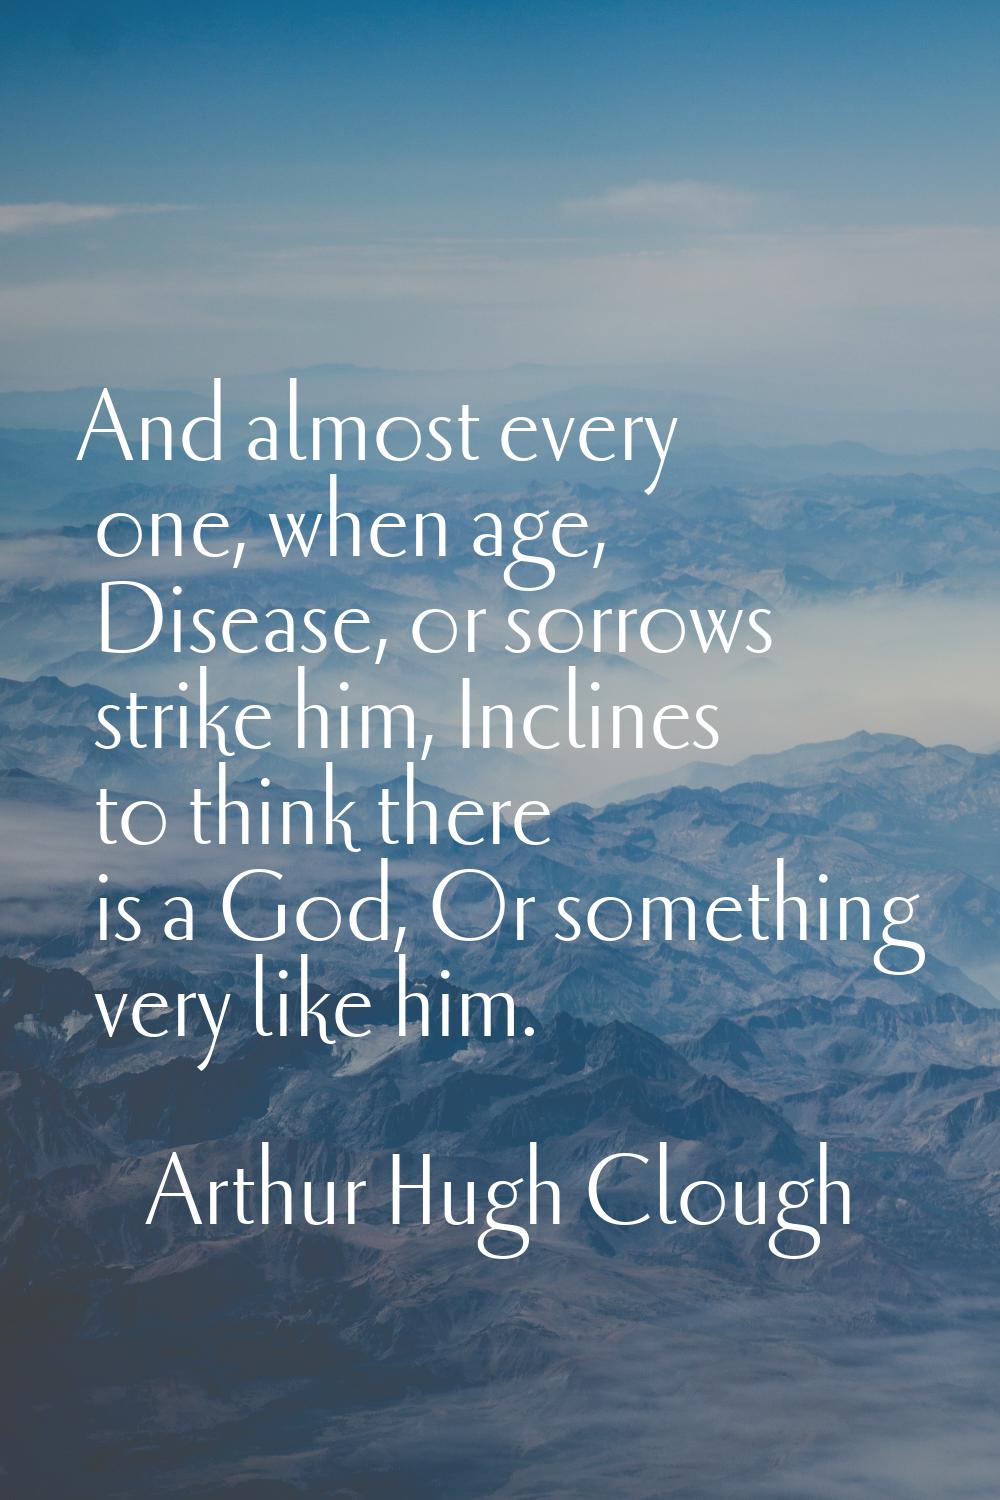 And almost every one, when age, Disease, or sorrows strike him, Inclines to think there is a God, O